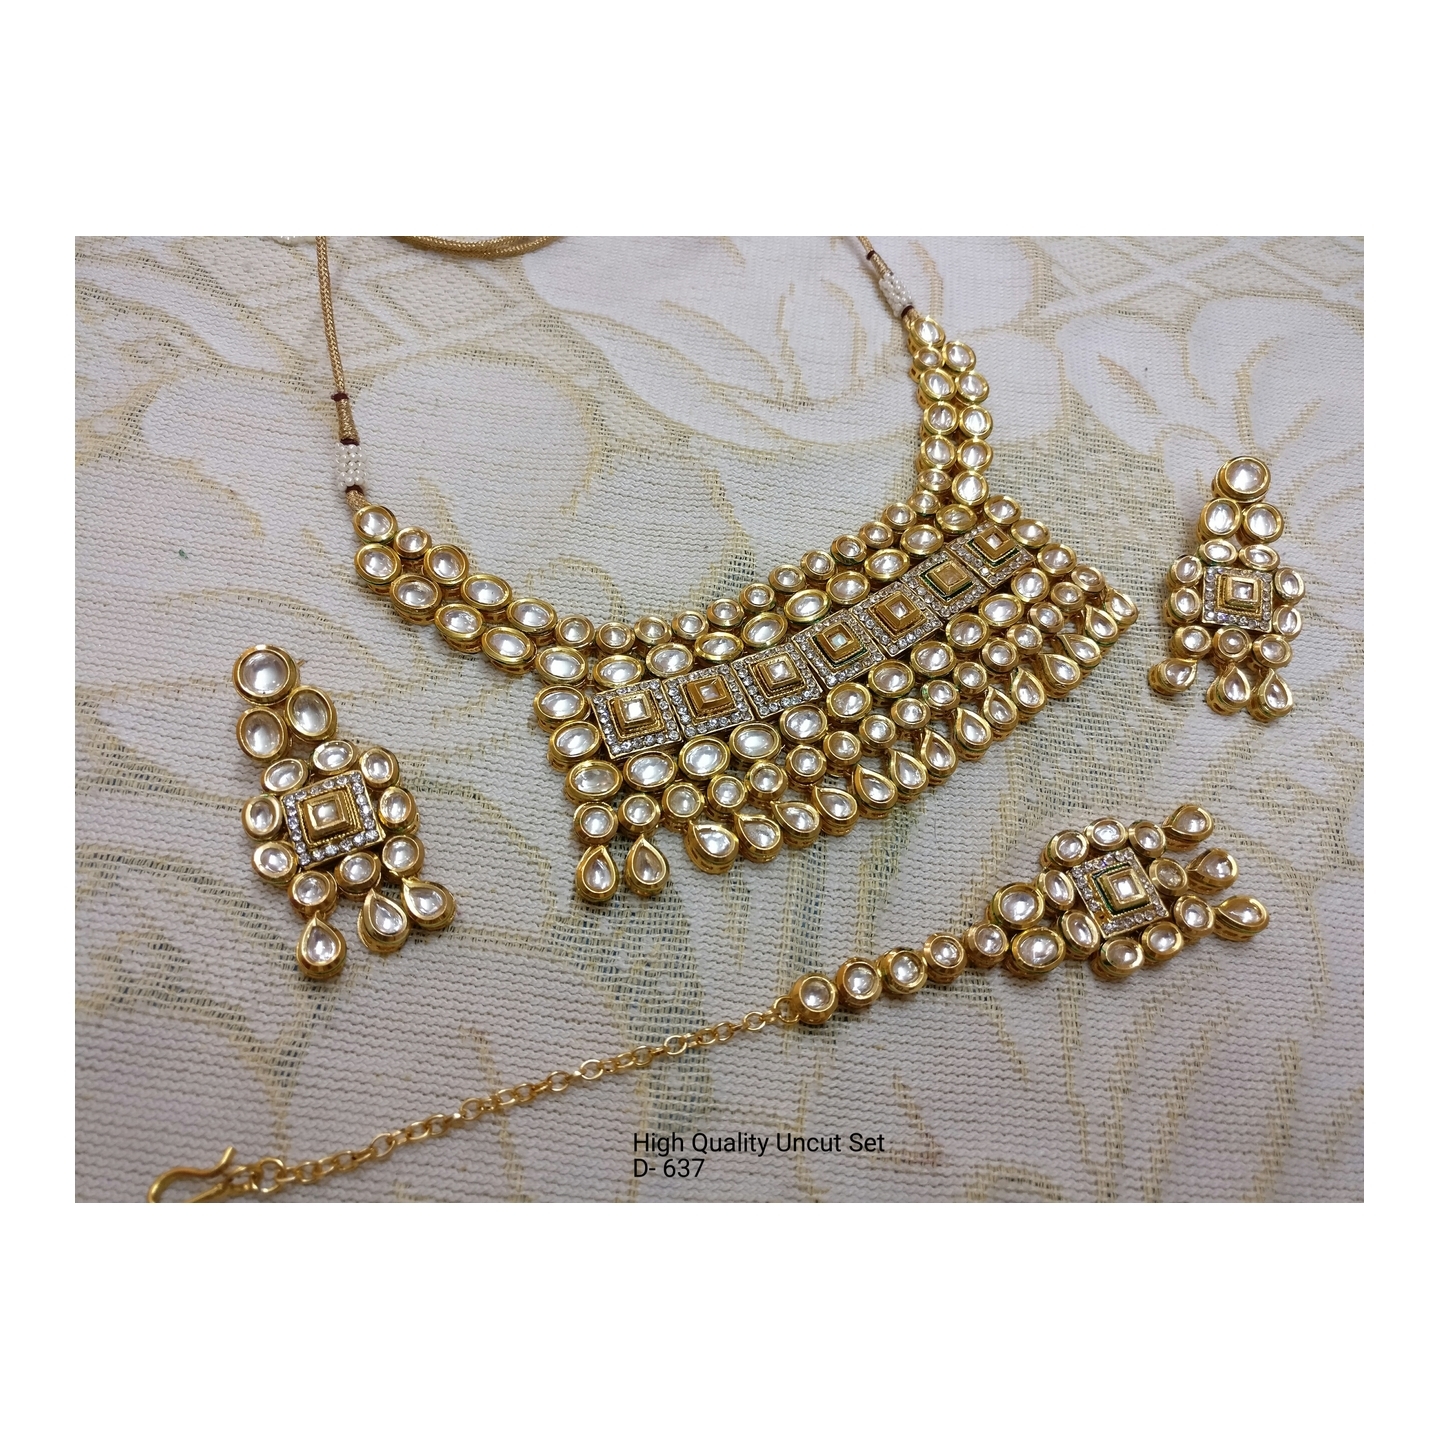 High Quality Gold Tone Kundan Necklace Set With Earring Tikka